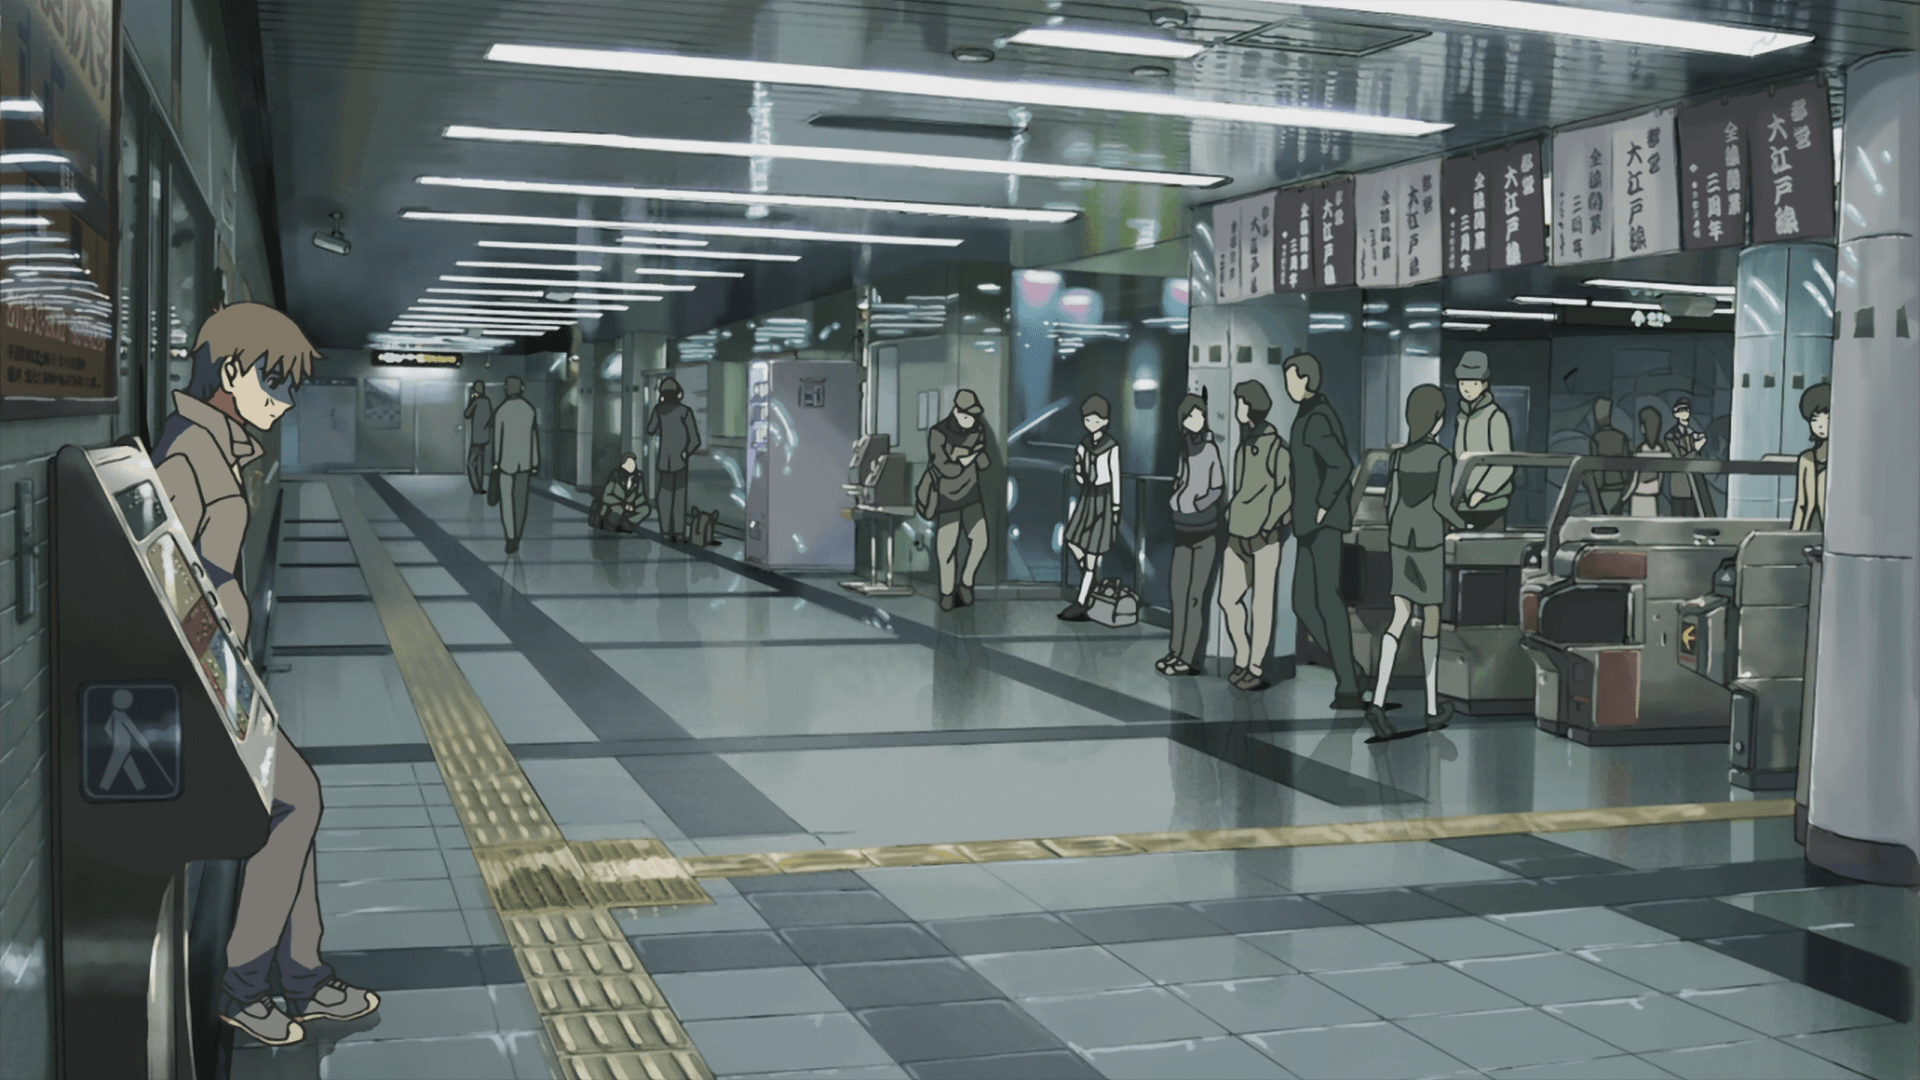 Subway station in the anime five centimeters per second wallpaper